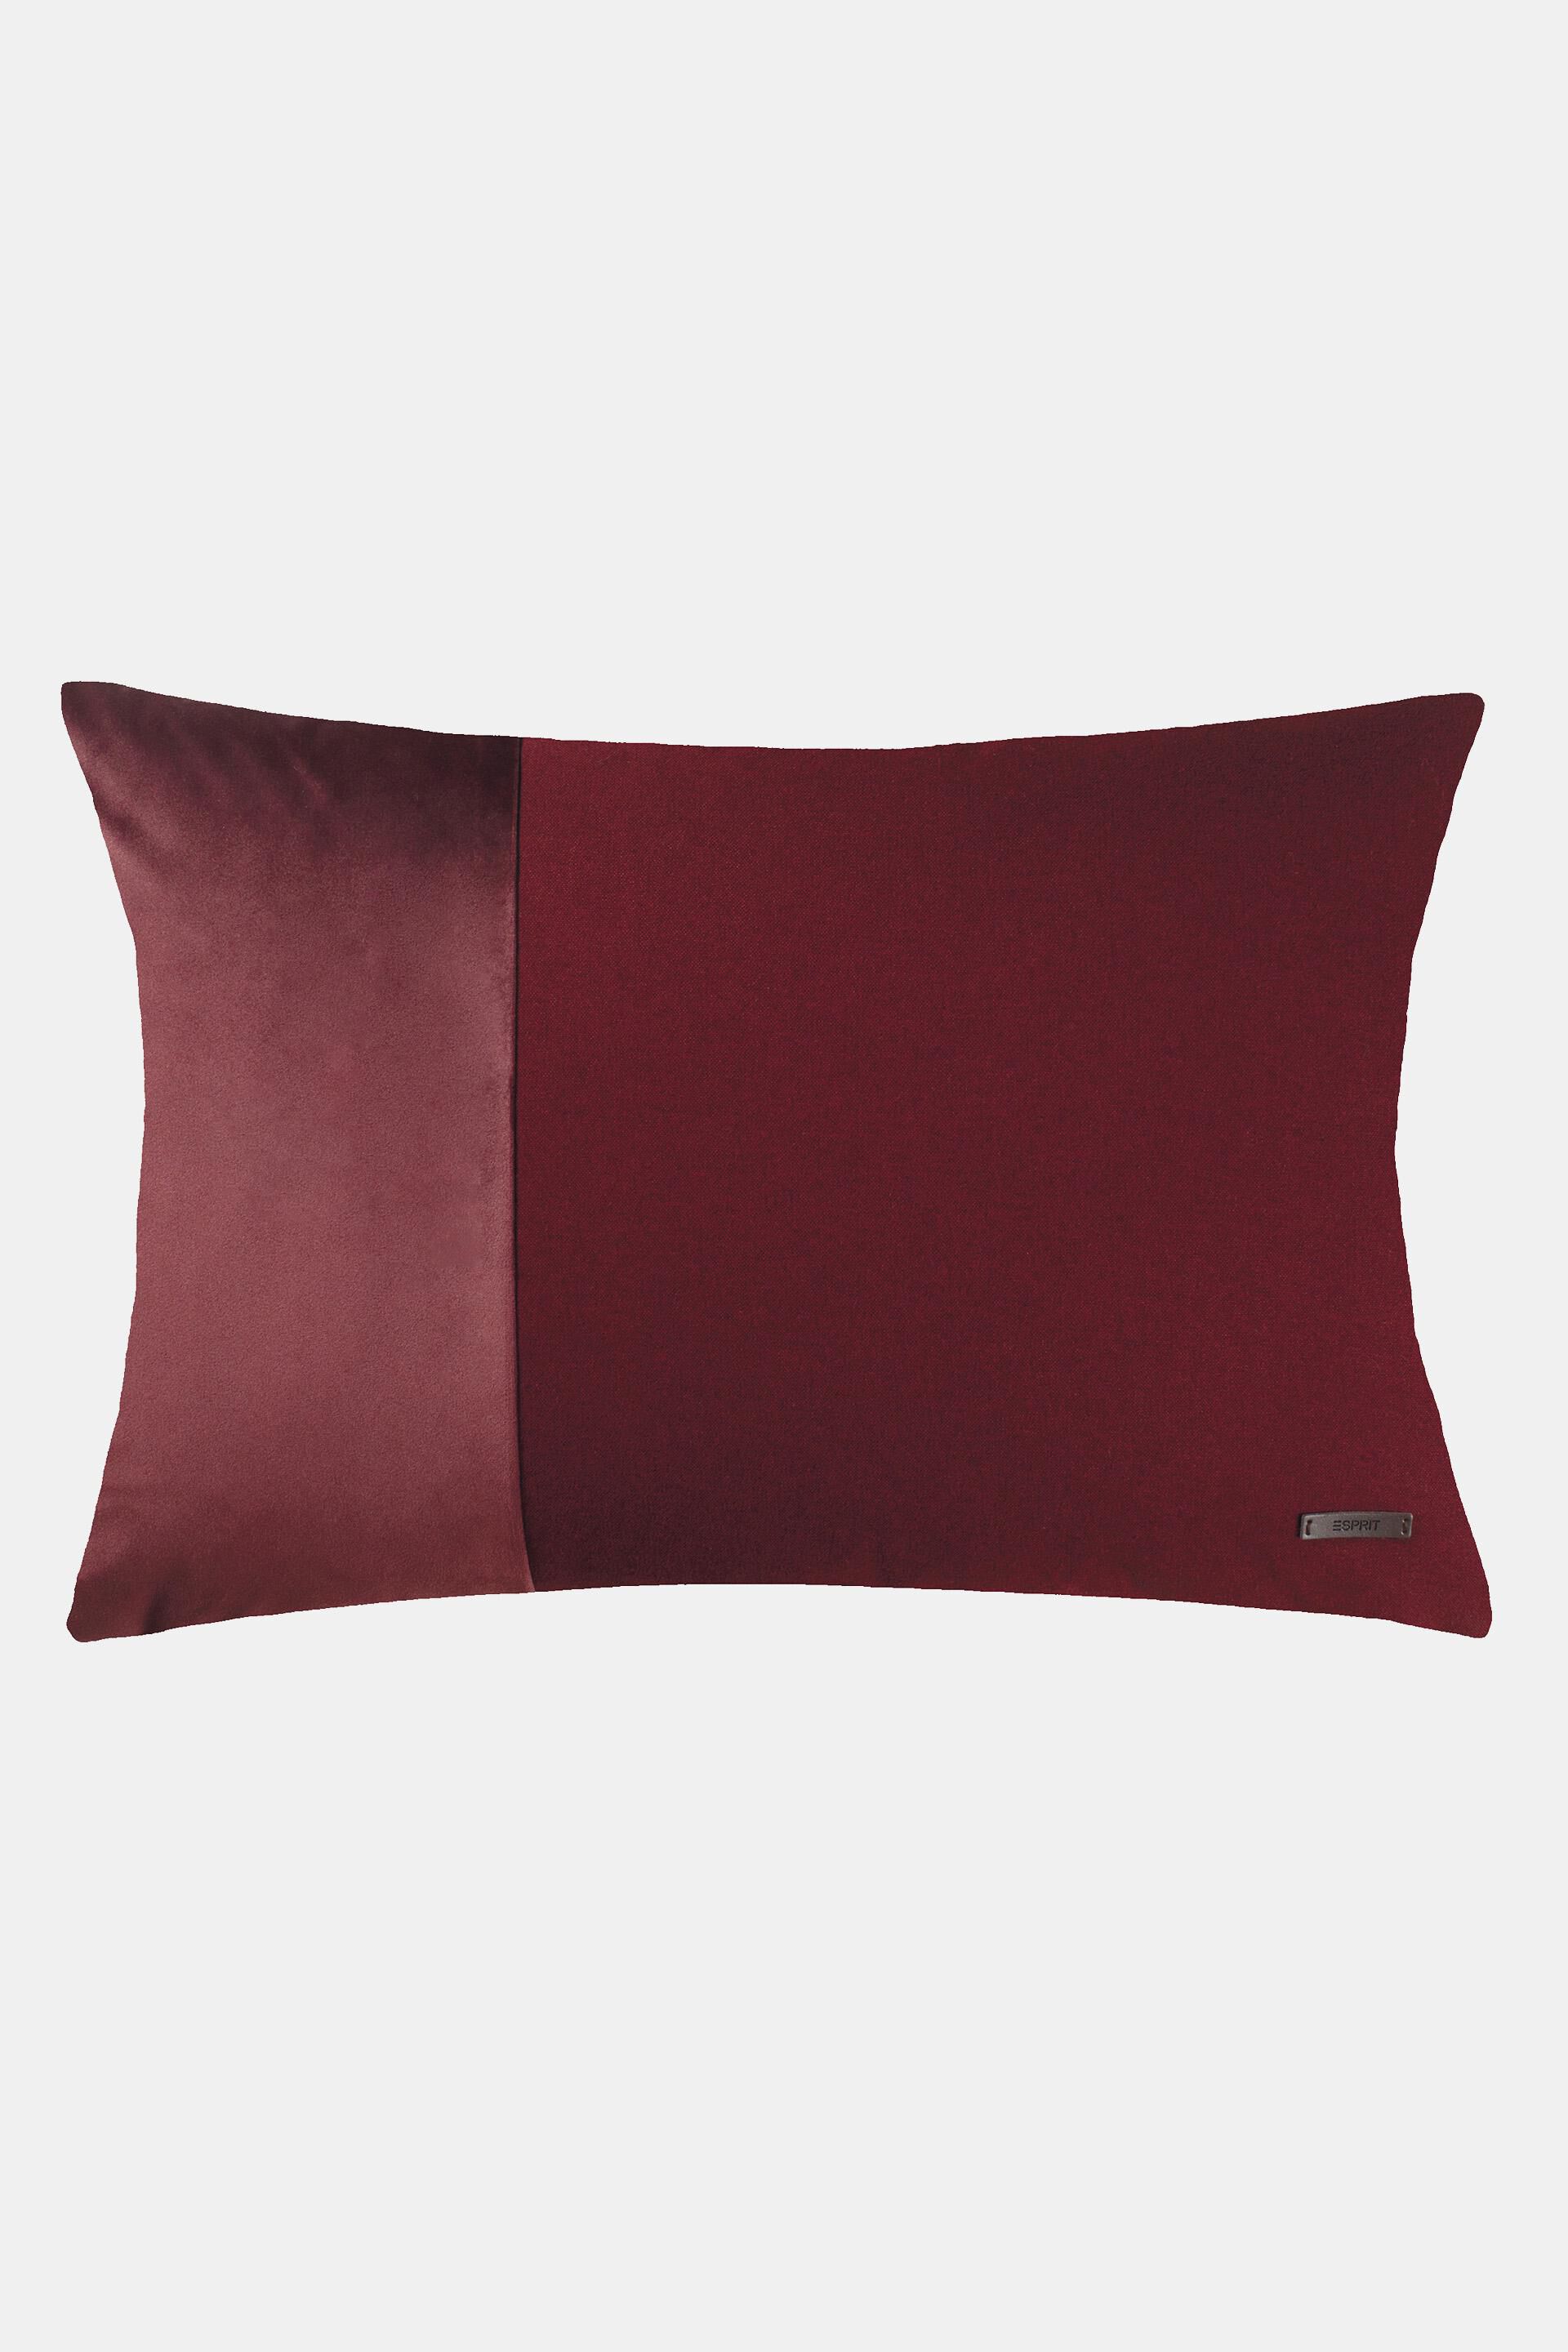 Esprit Mixed cover with micro-velvet cushion material